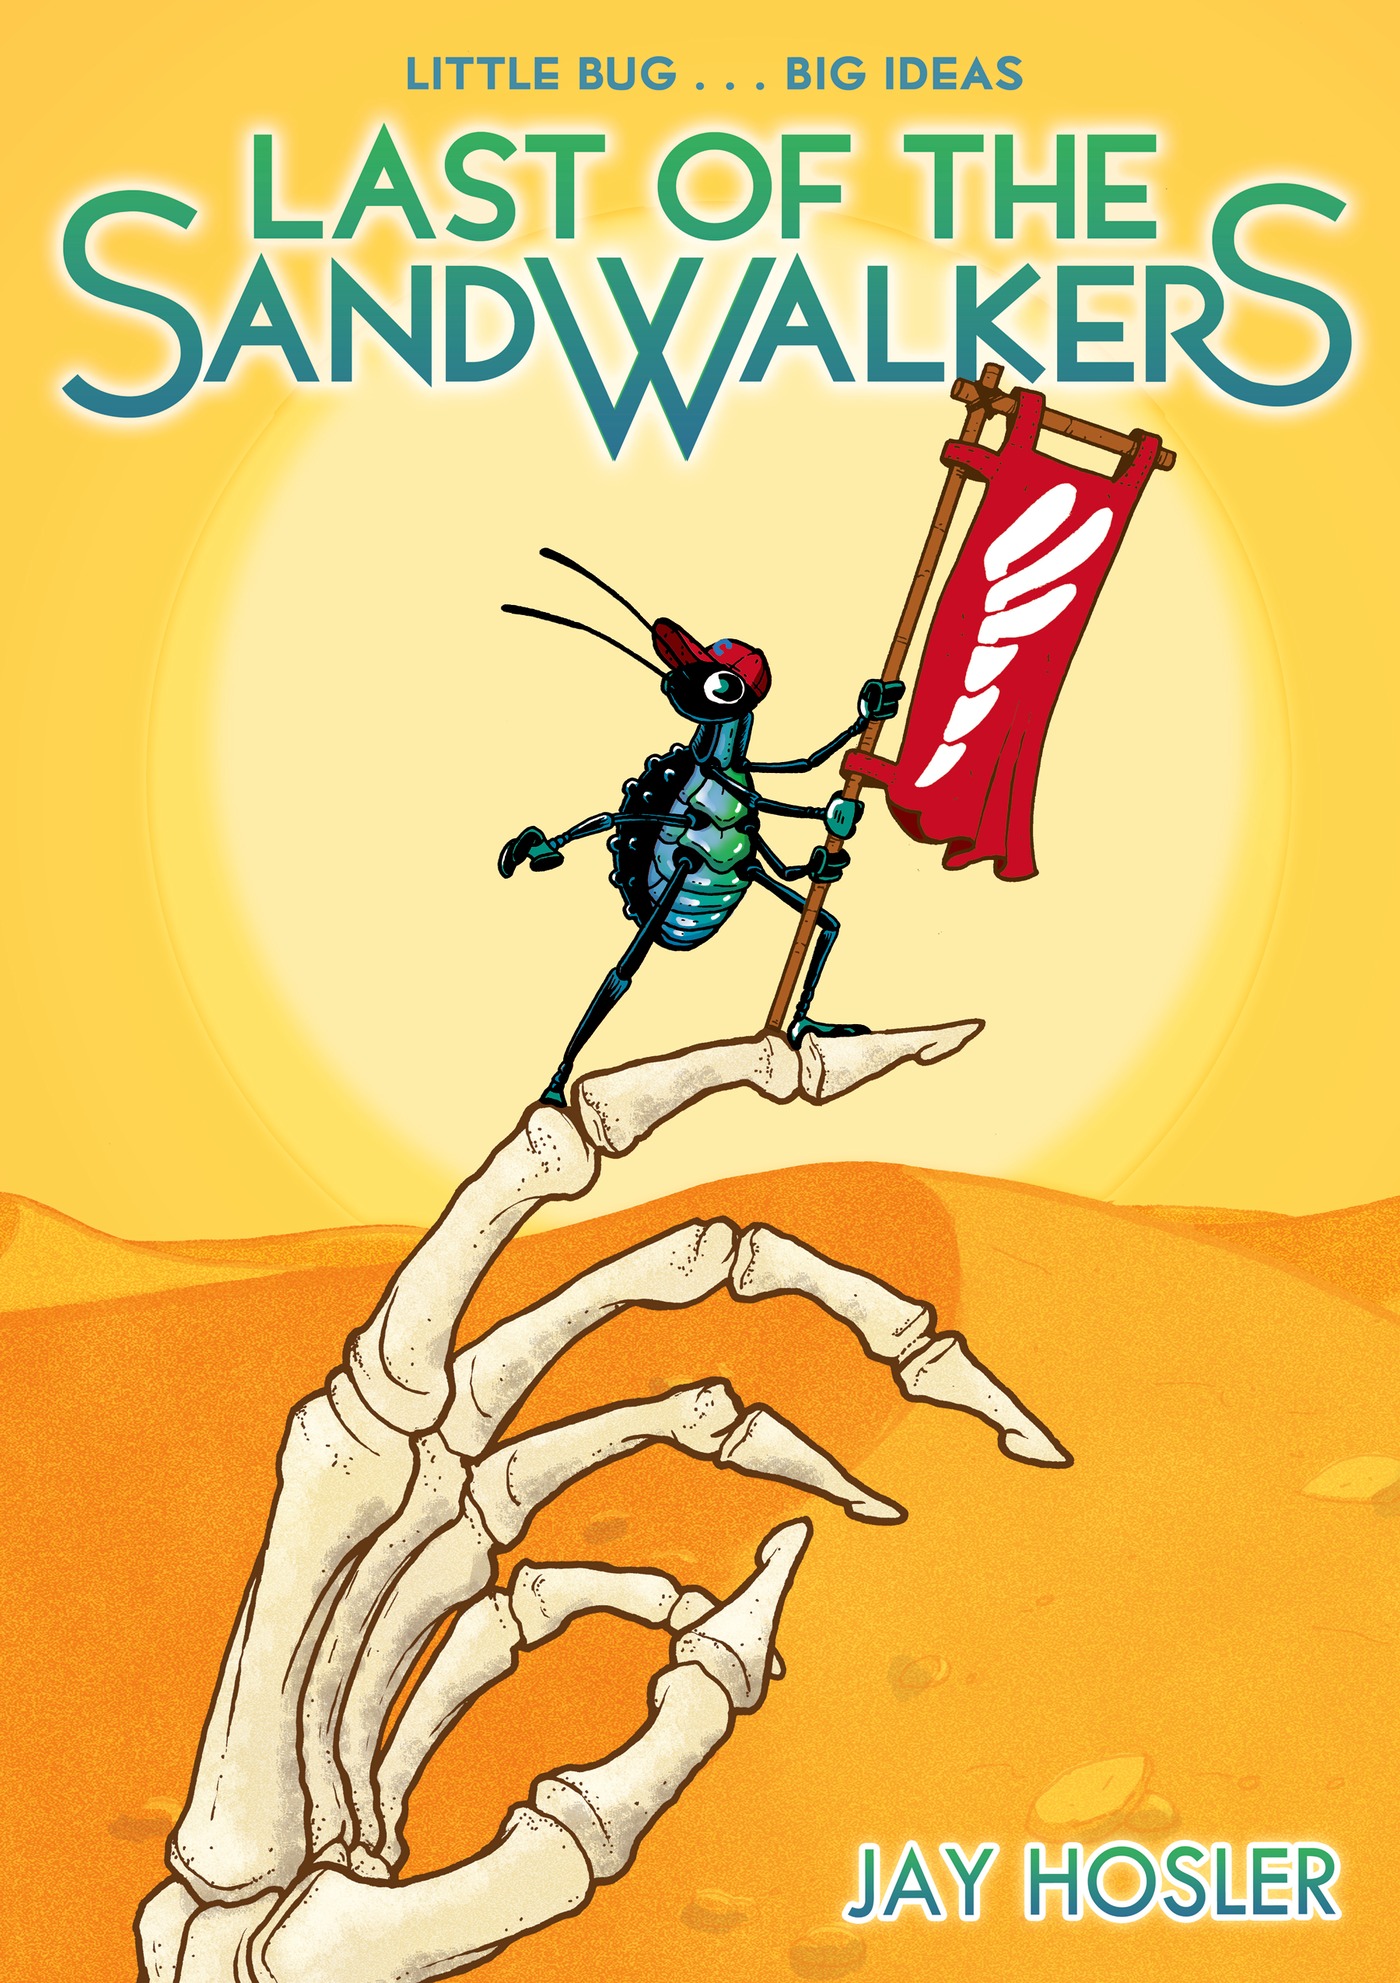 Last of the sandwalkers cover image